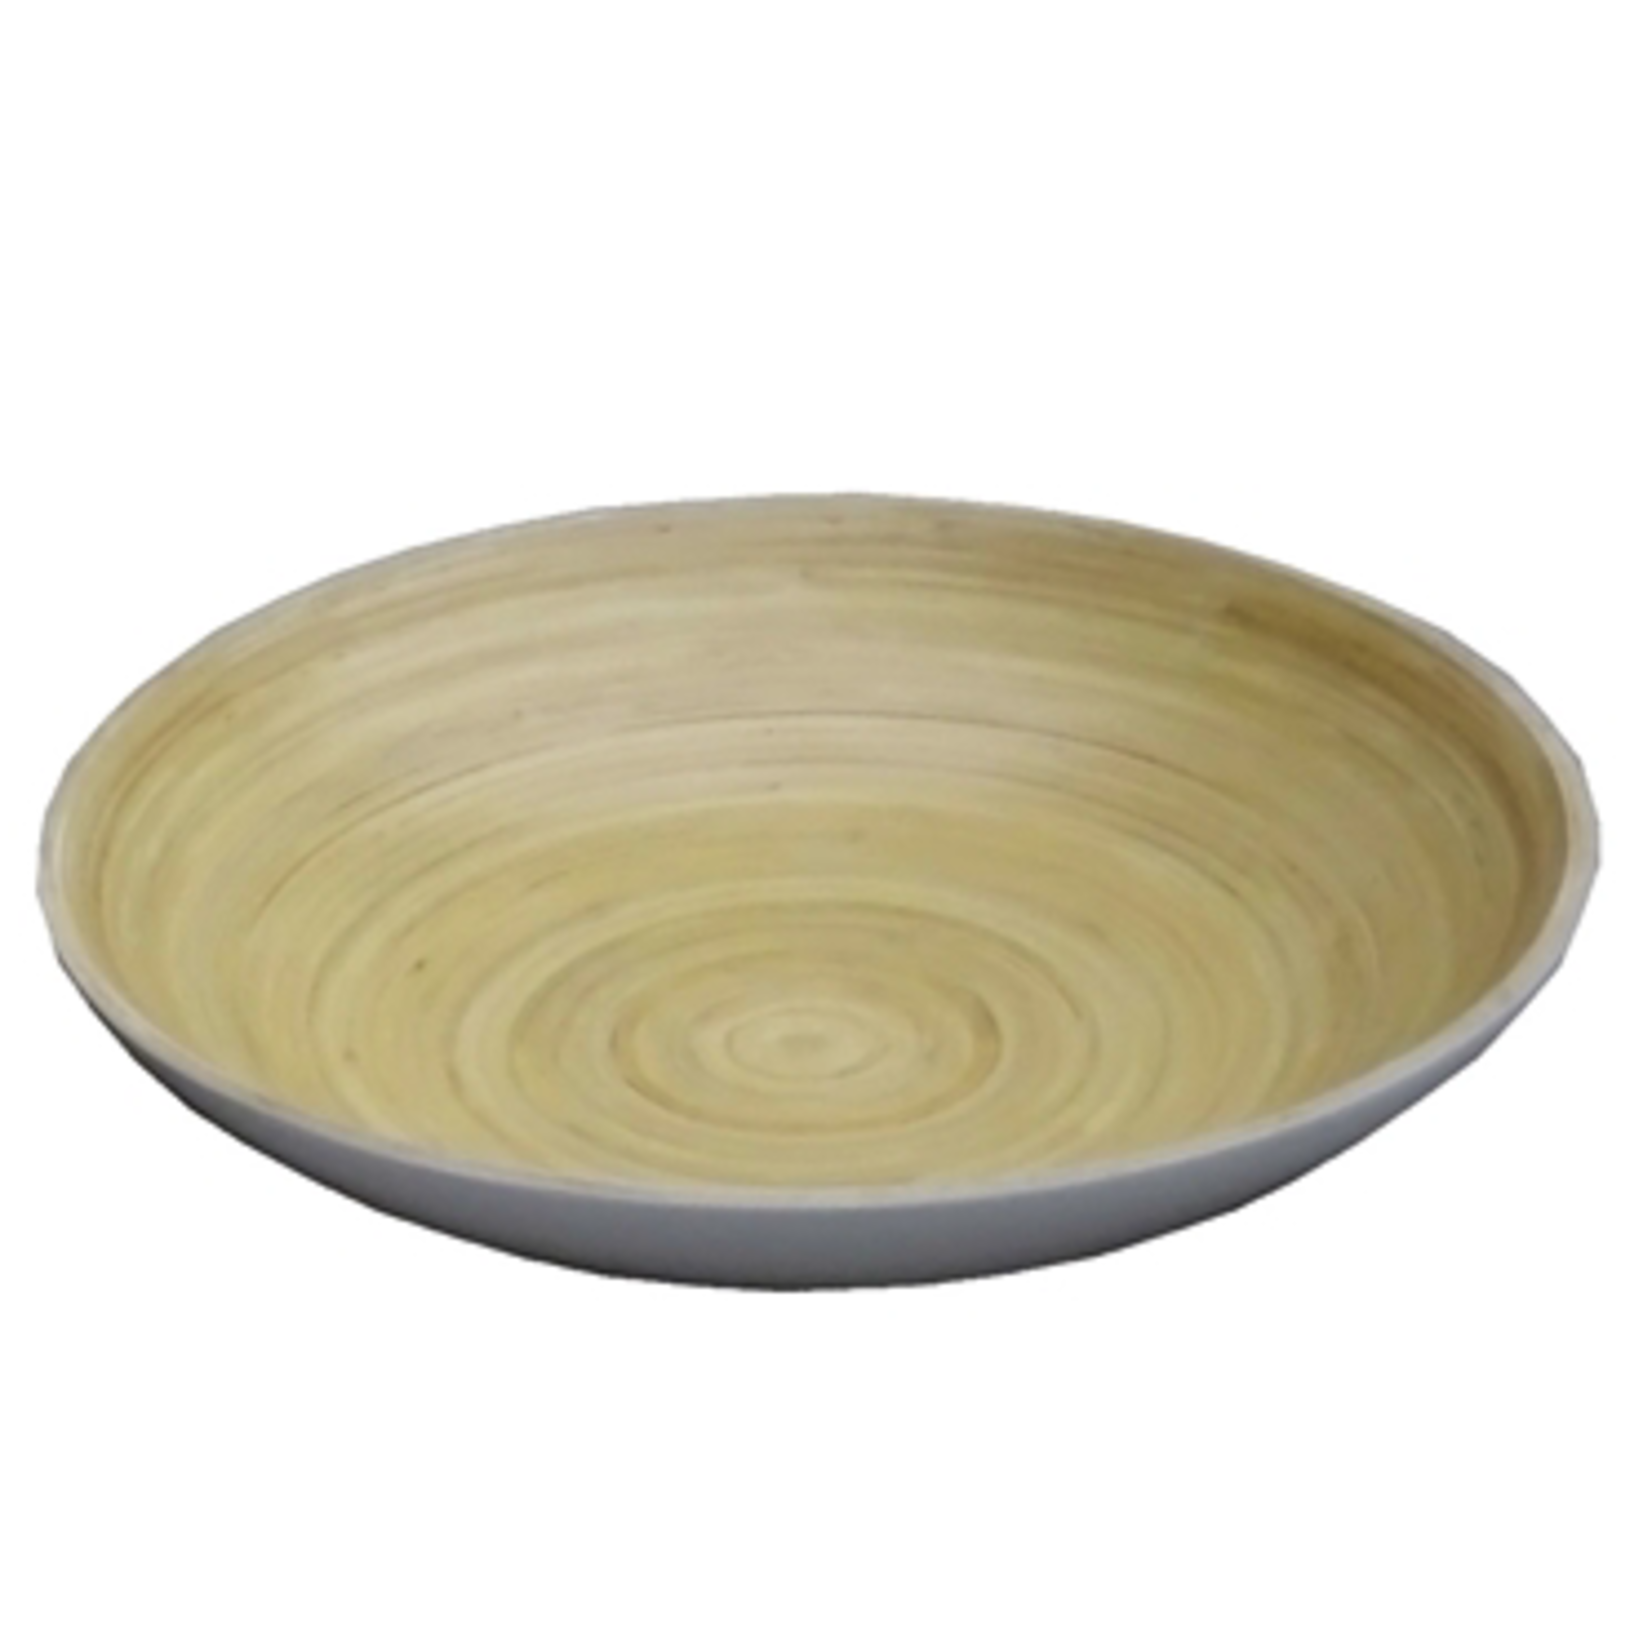 Outside The Box 11" & 14" Set Of 2 Pressed White & Natural Bamboo Bowls